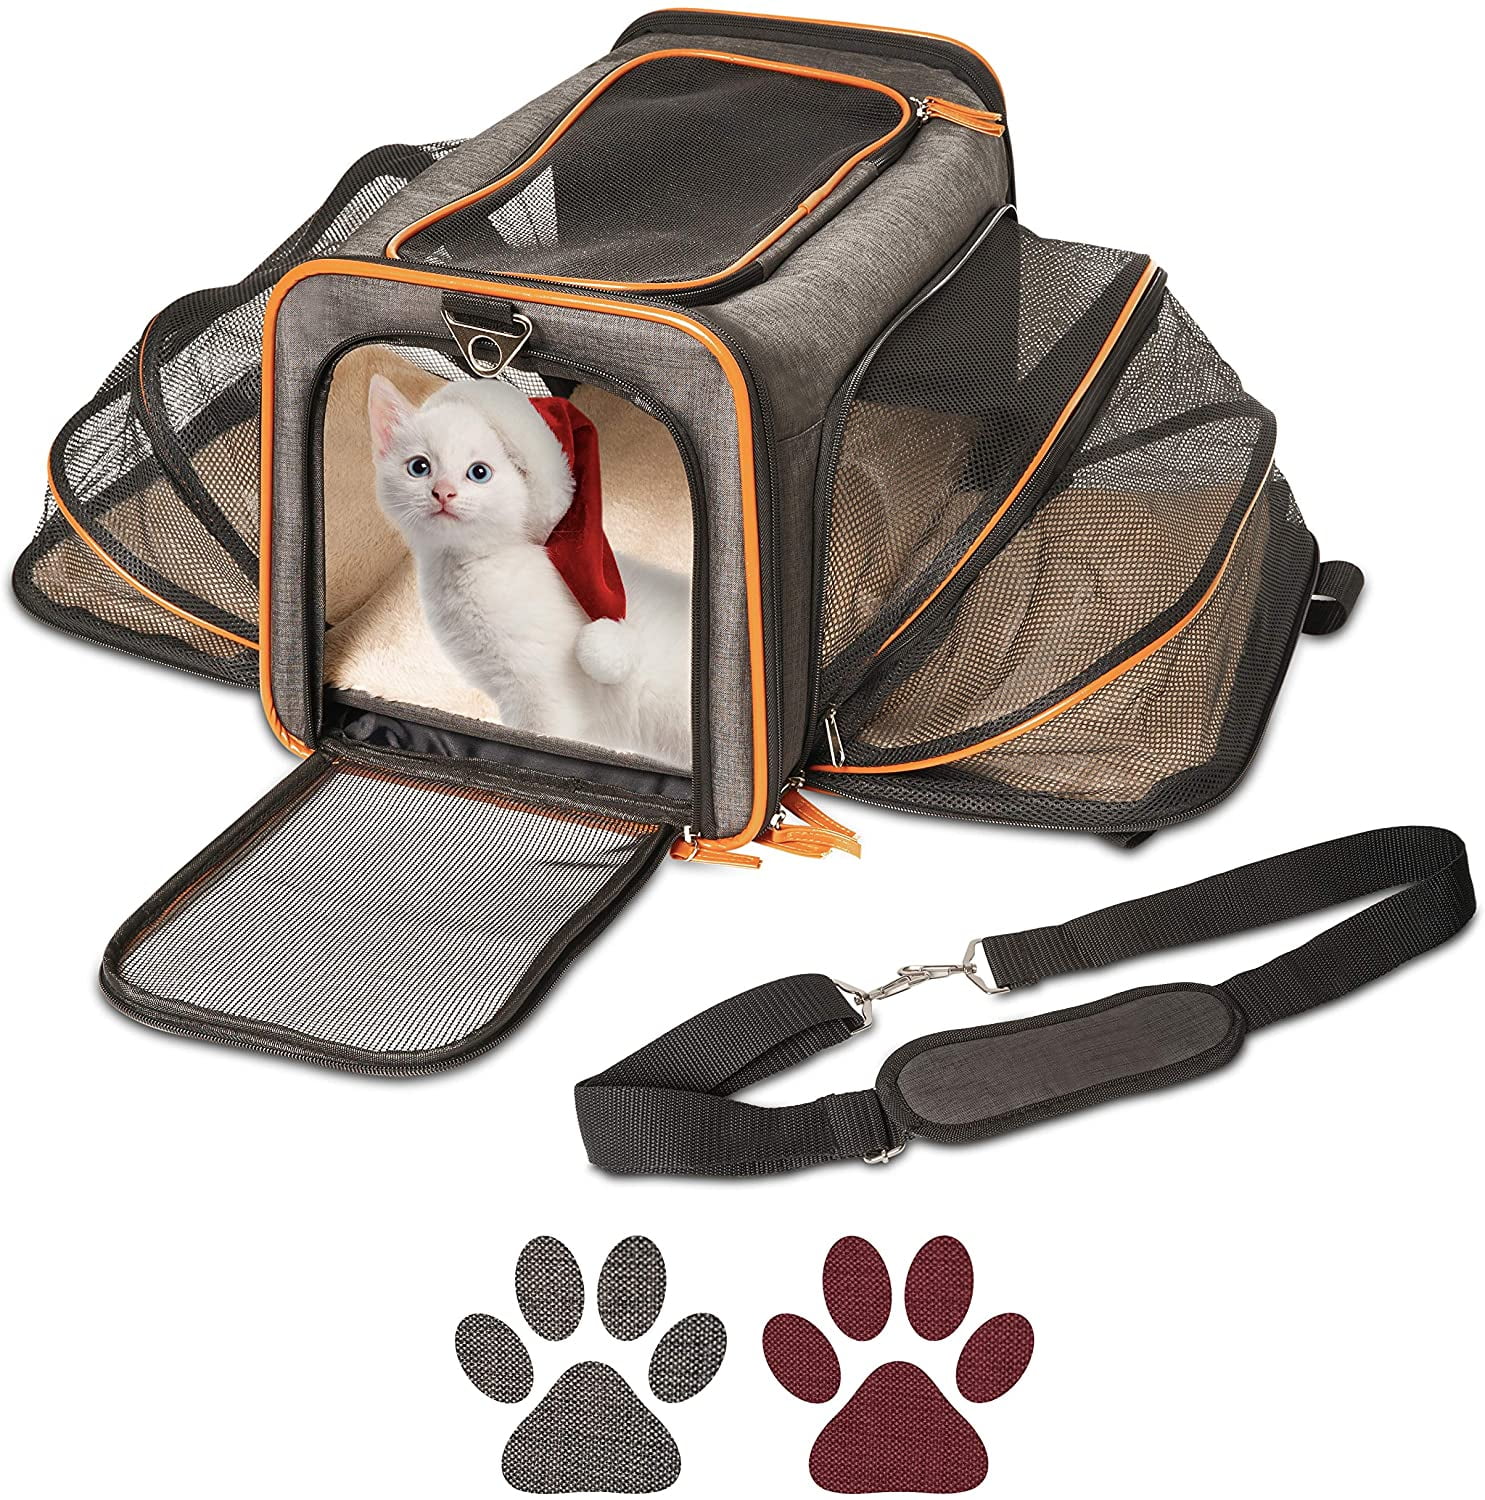 Estarer Soft Sided Pet Carrier Airline Approved, 4 Sides Expandable  Collapsible Cat Carrier with Pockets & Removable Fleece Pad